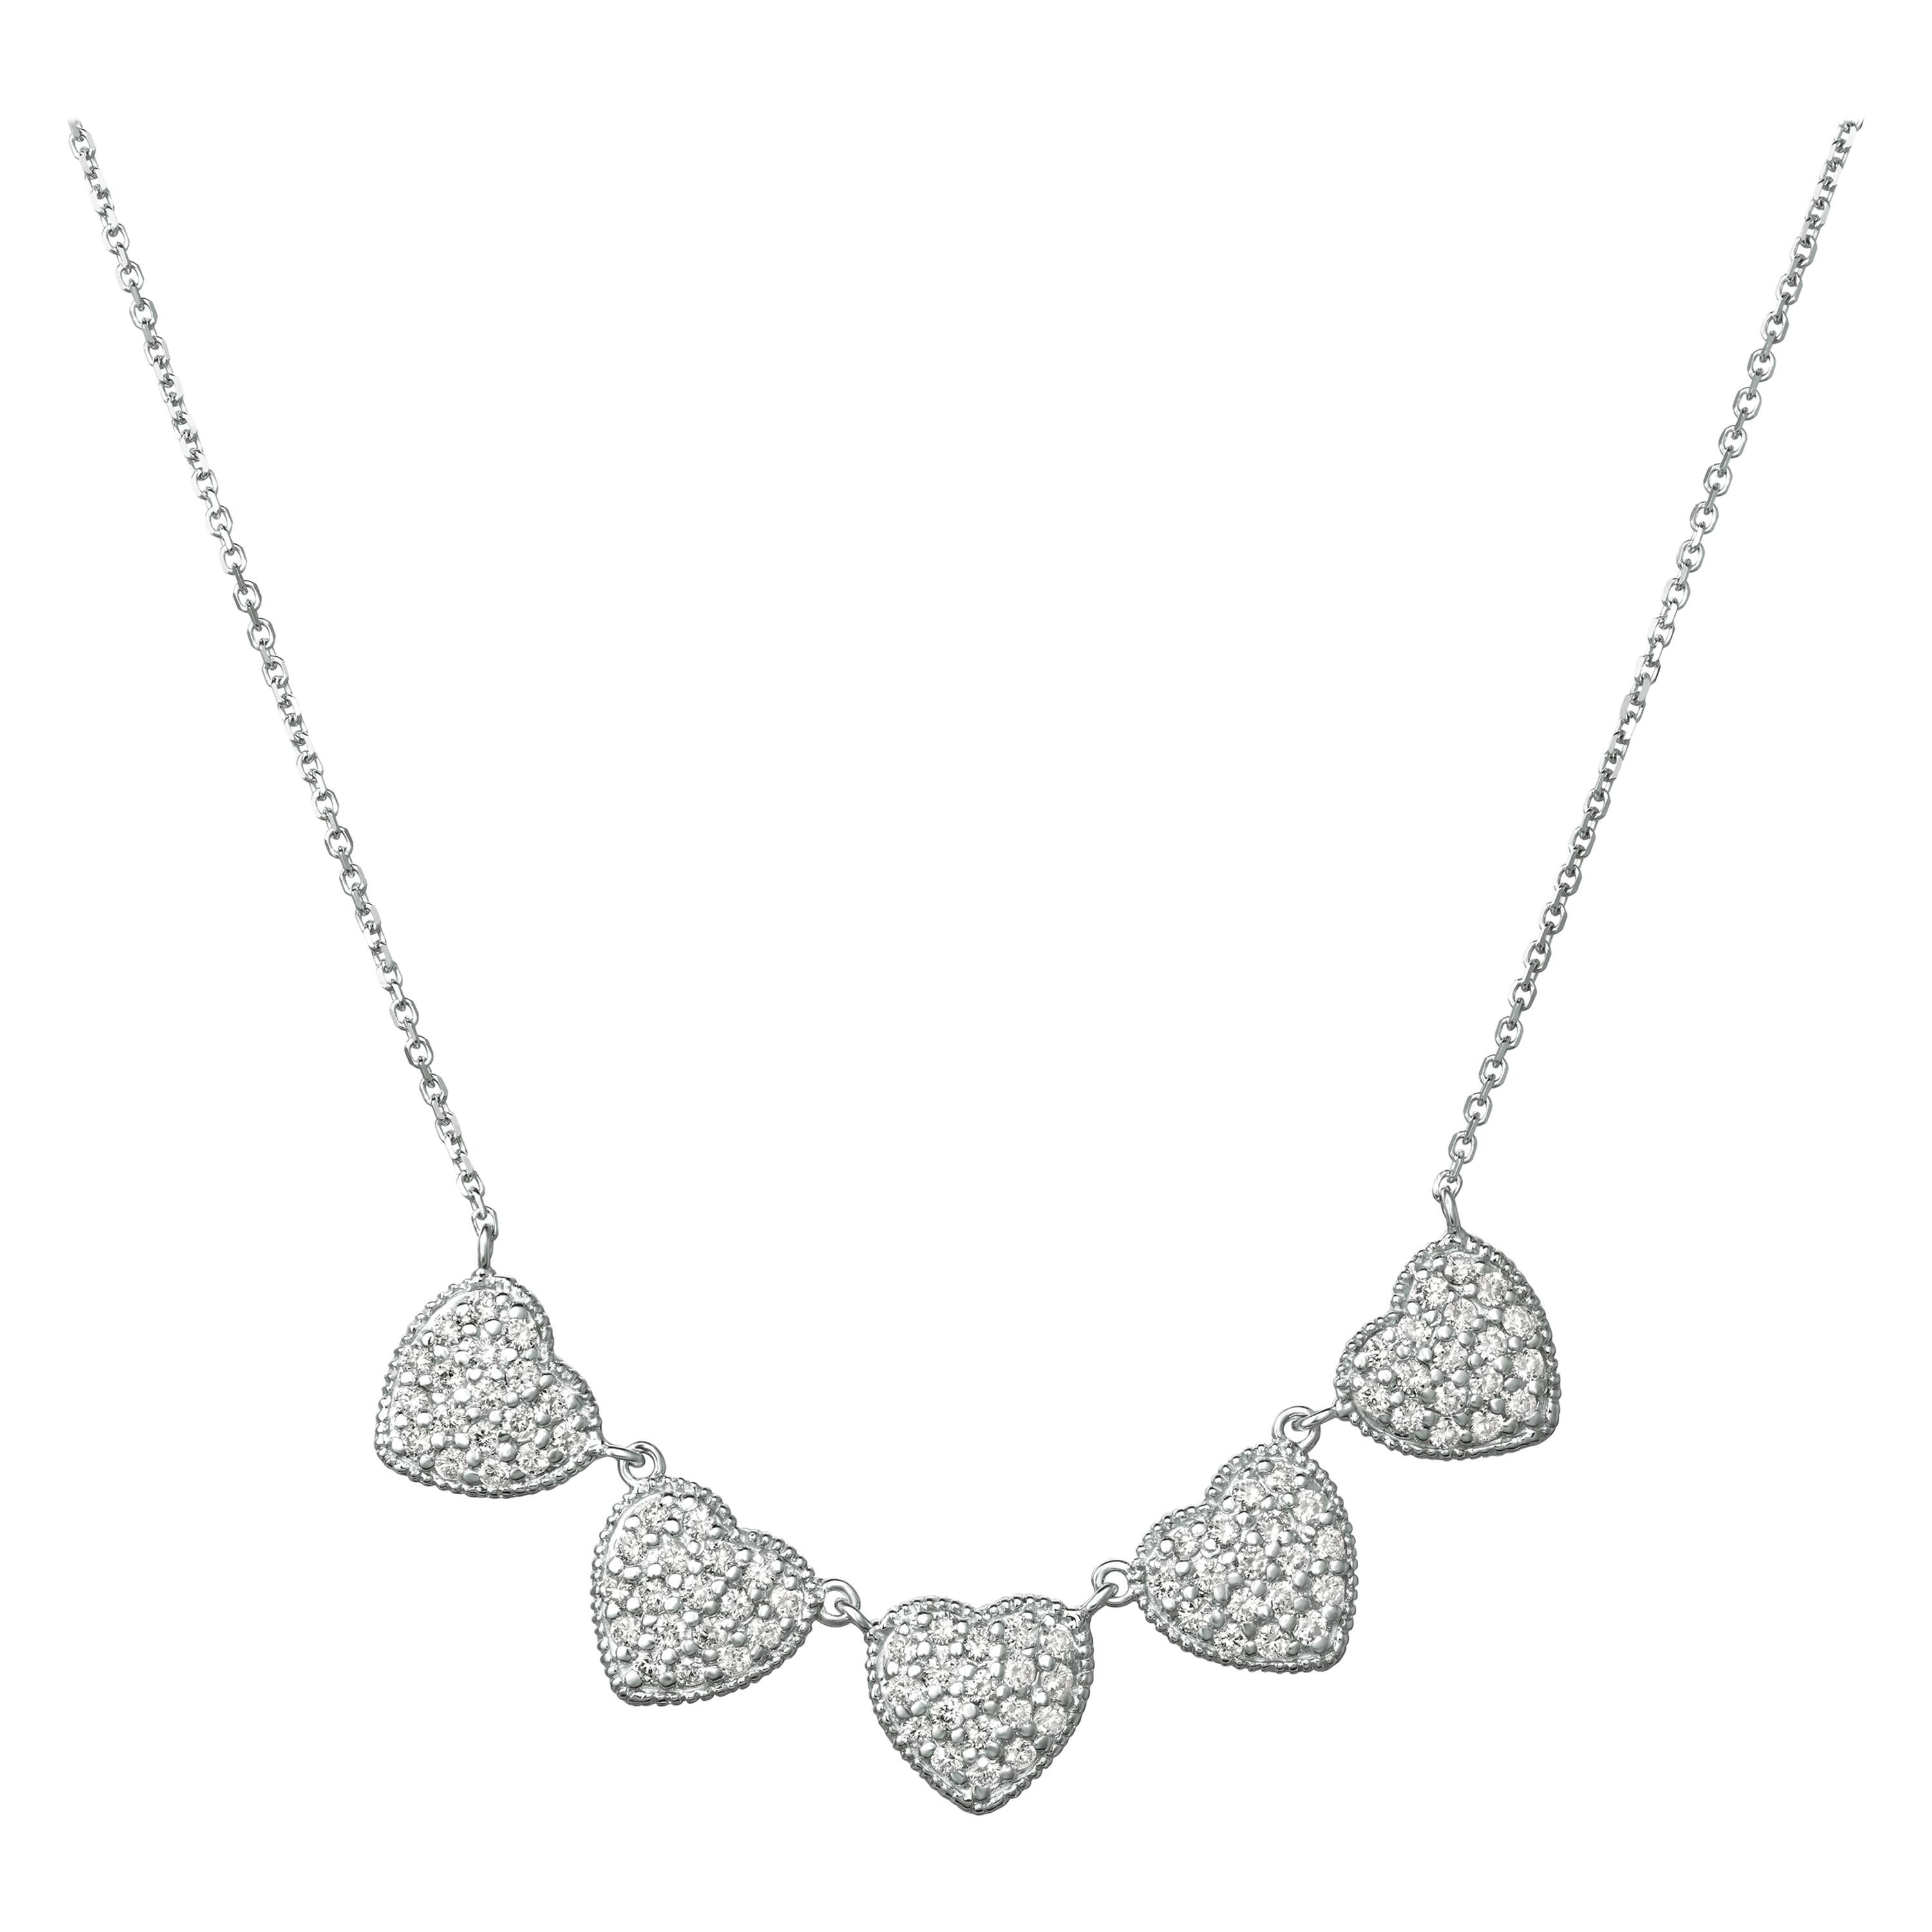 1.00 Carat Natural Diamond Heart Necklace G SI Set in 14 Karat White Gold For Sale